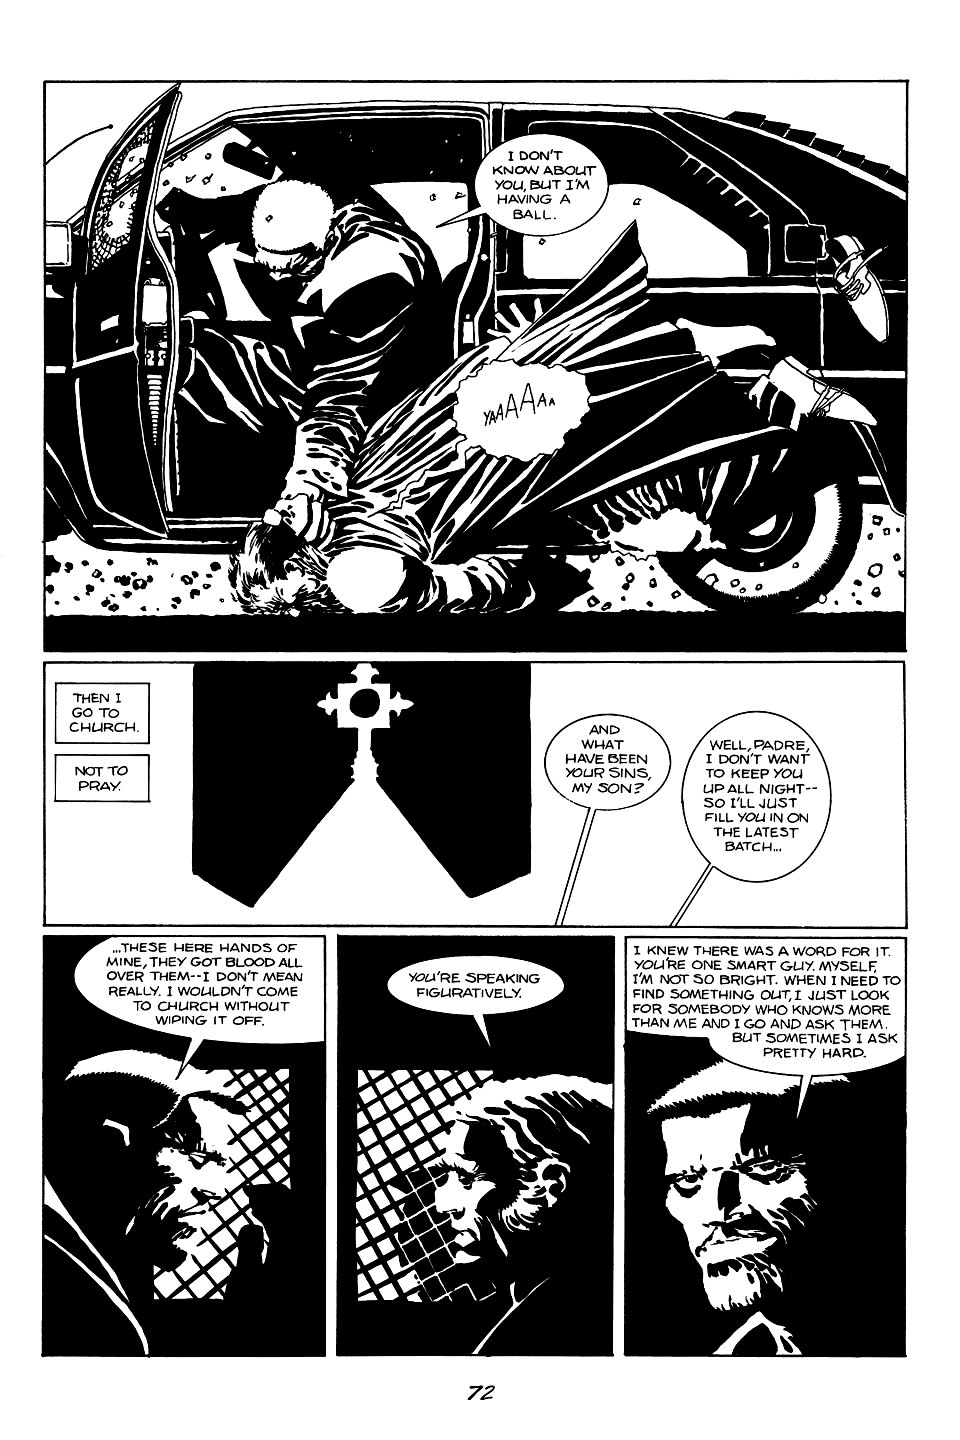 page 72 of sin city 1 the hard goodbye